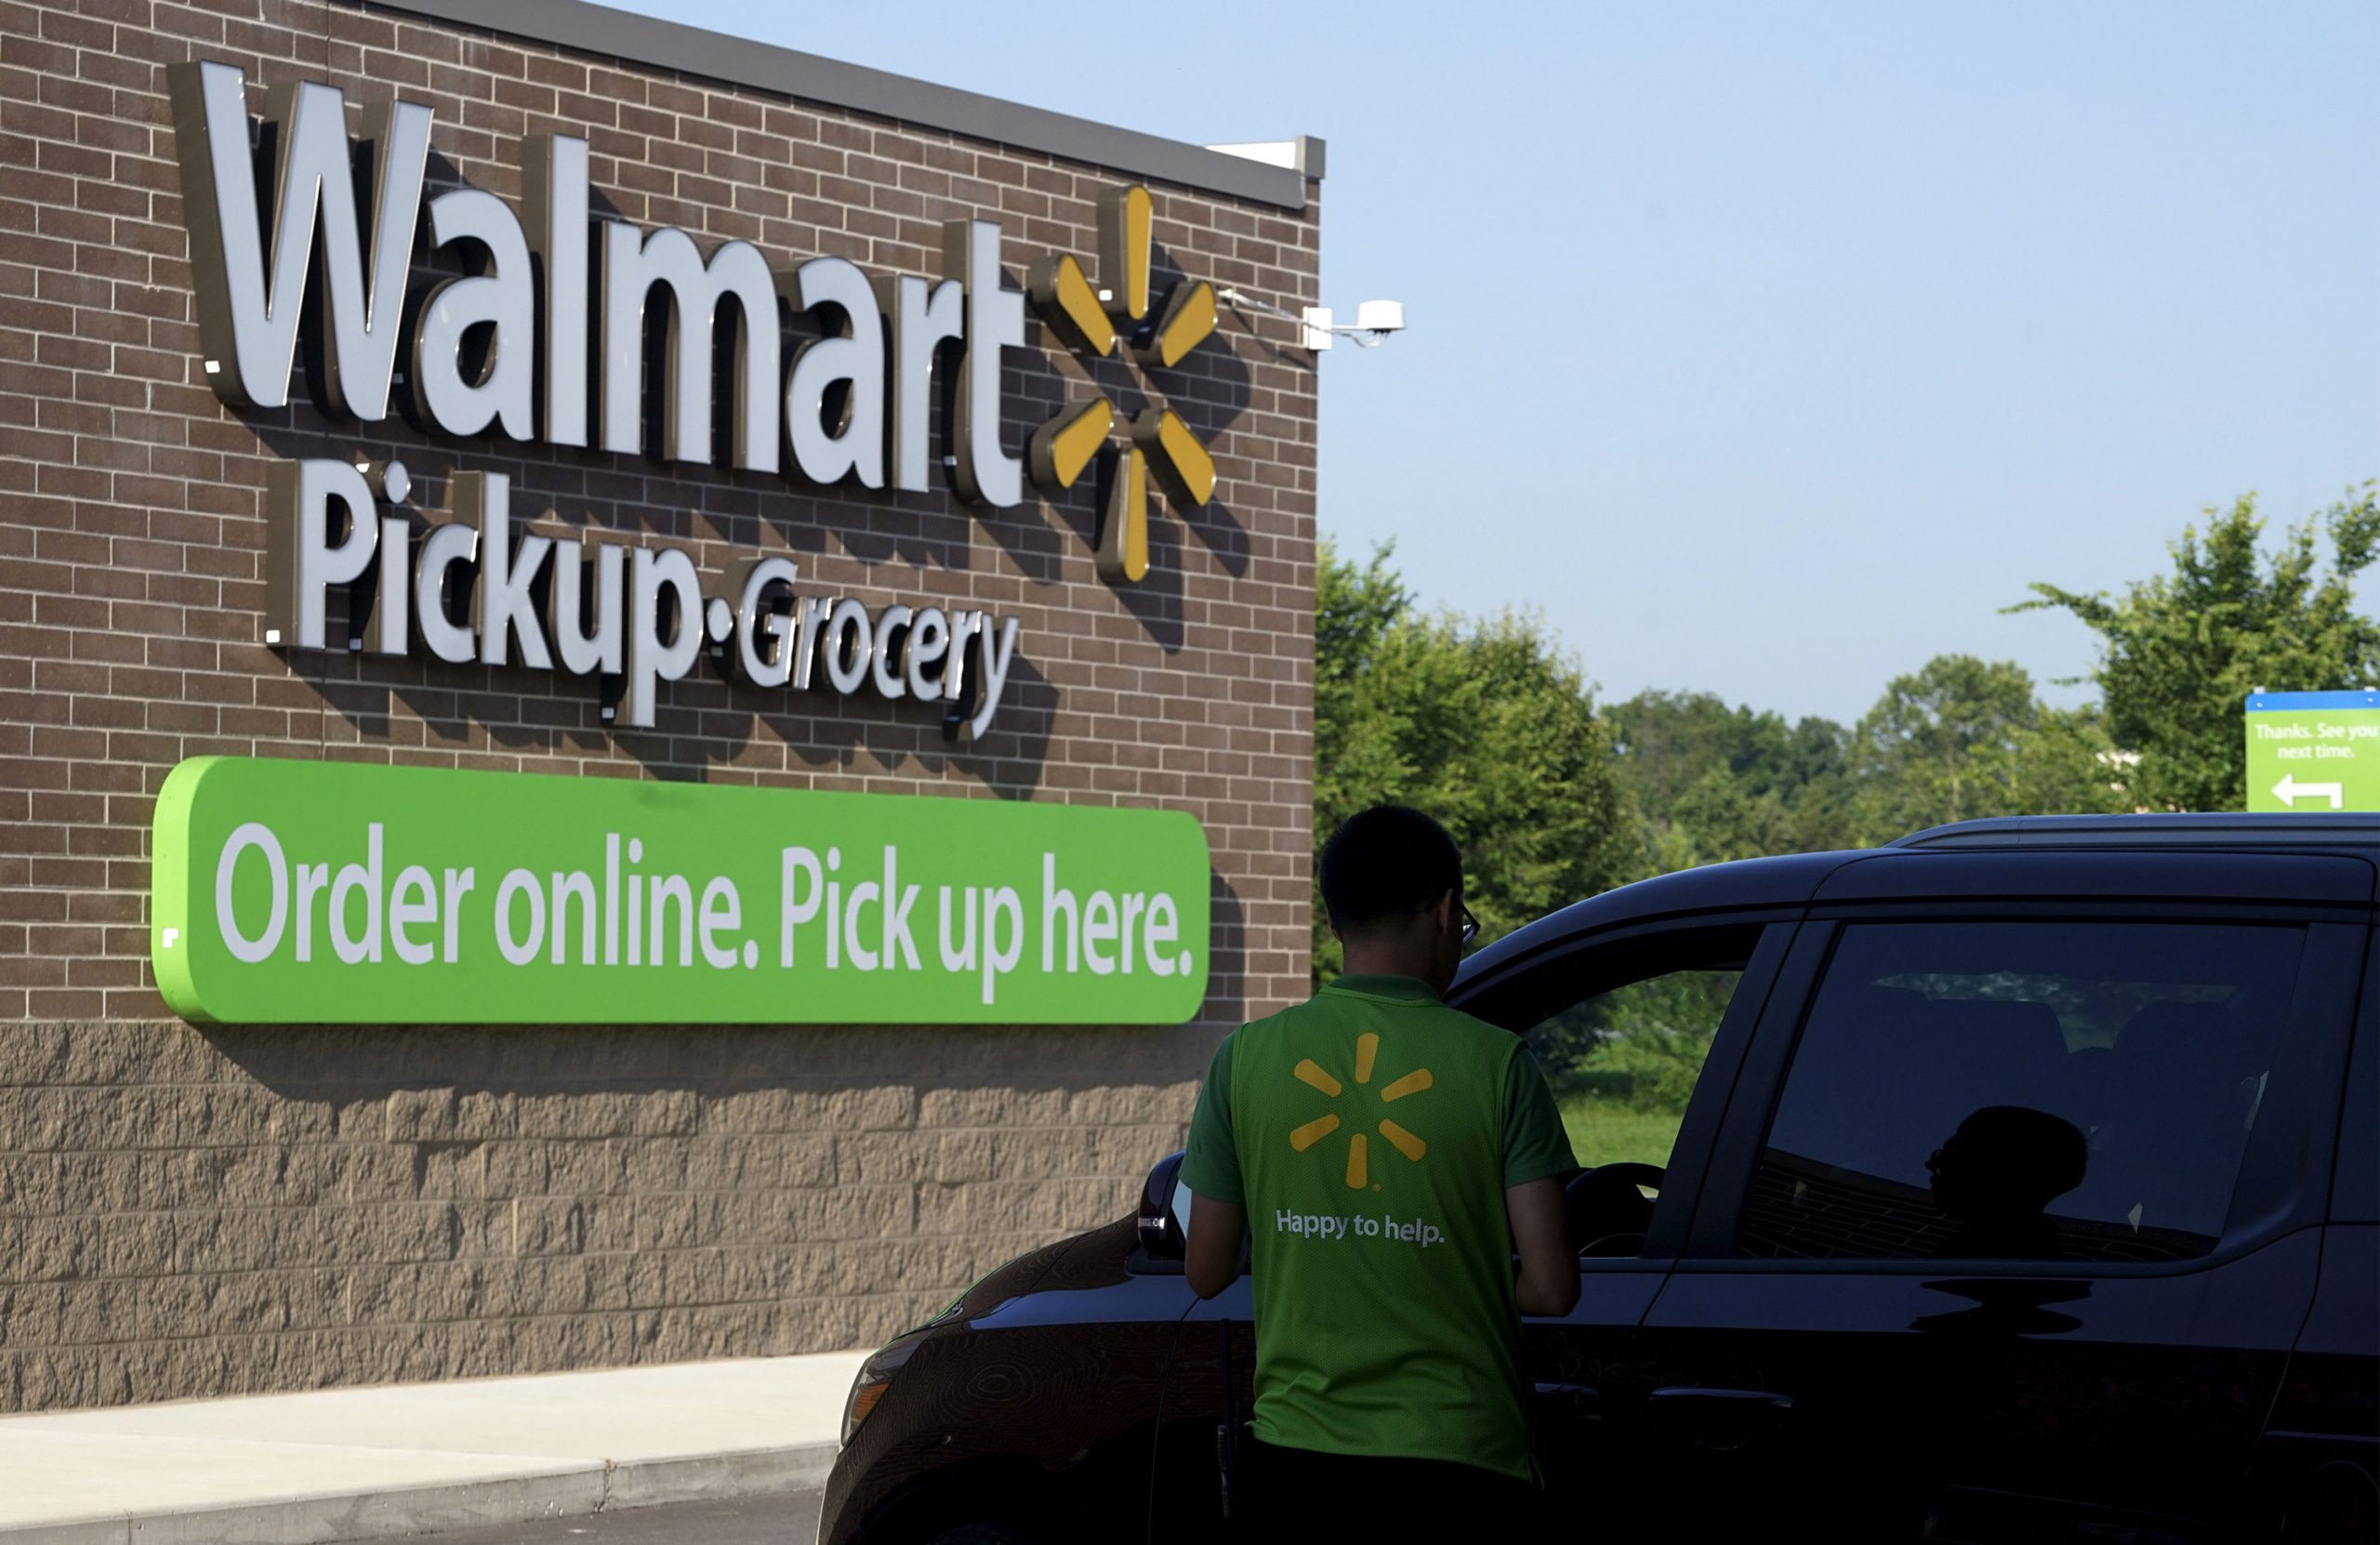 Walmart, Goal attempt to beat Amazon with curbside pickup